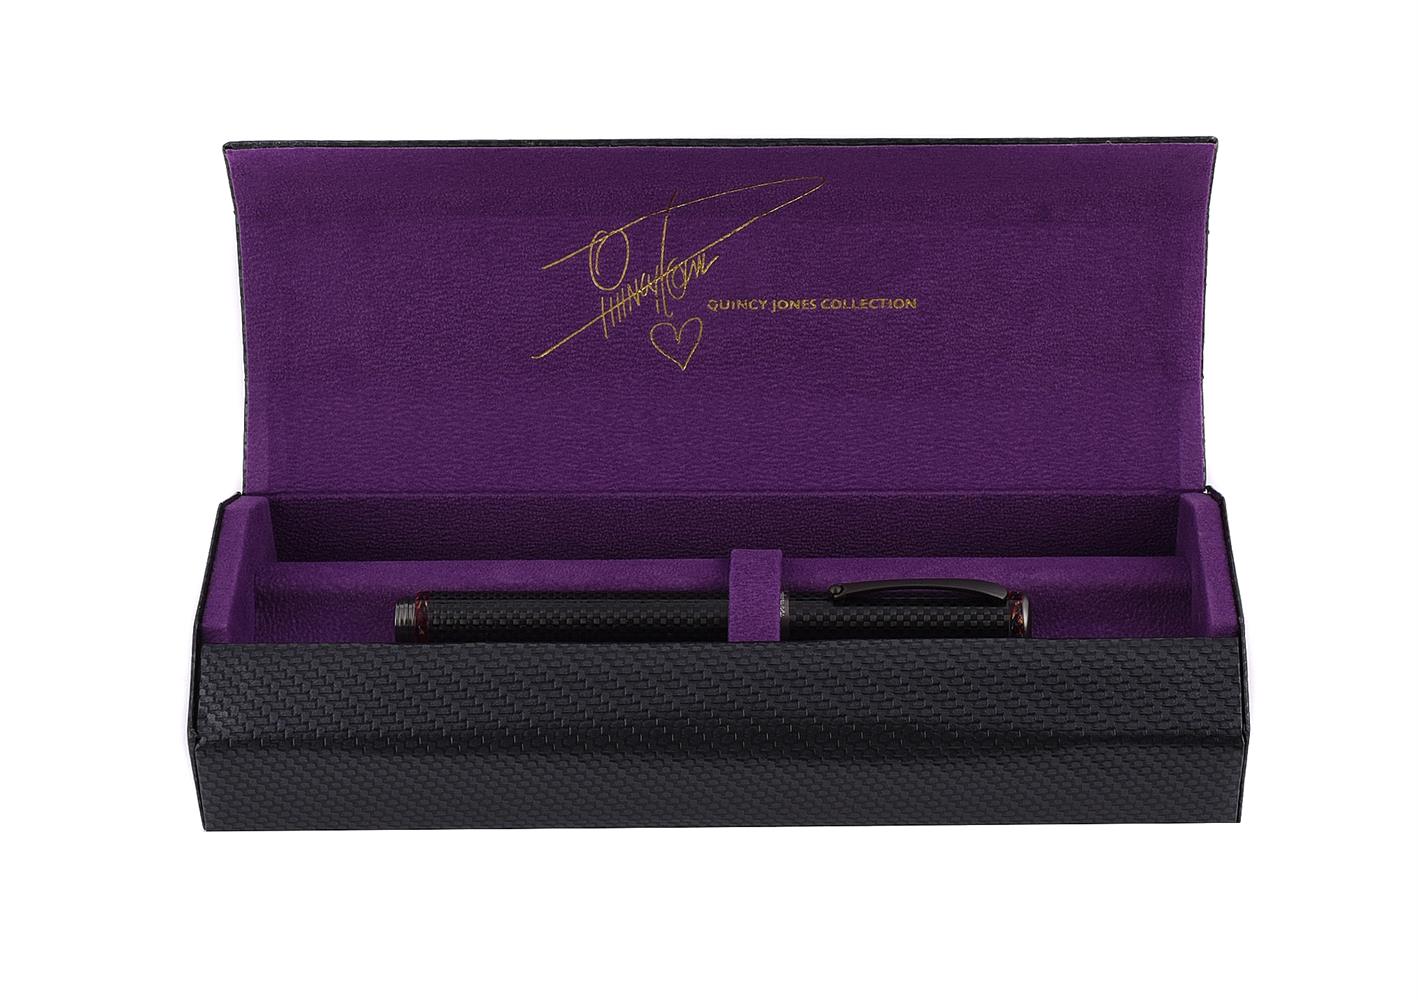 MONTEGRAPPA, ICON SERIES QUINCY JONES, A LIMITED EDITION CARBON FIBRE FOUNTAIN PEN - Image 3 of 3